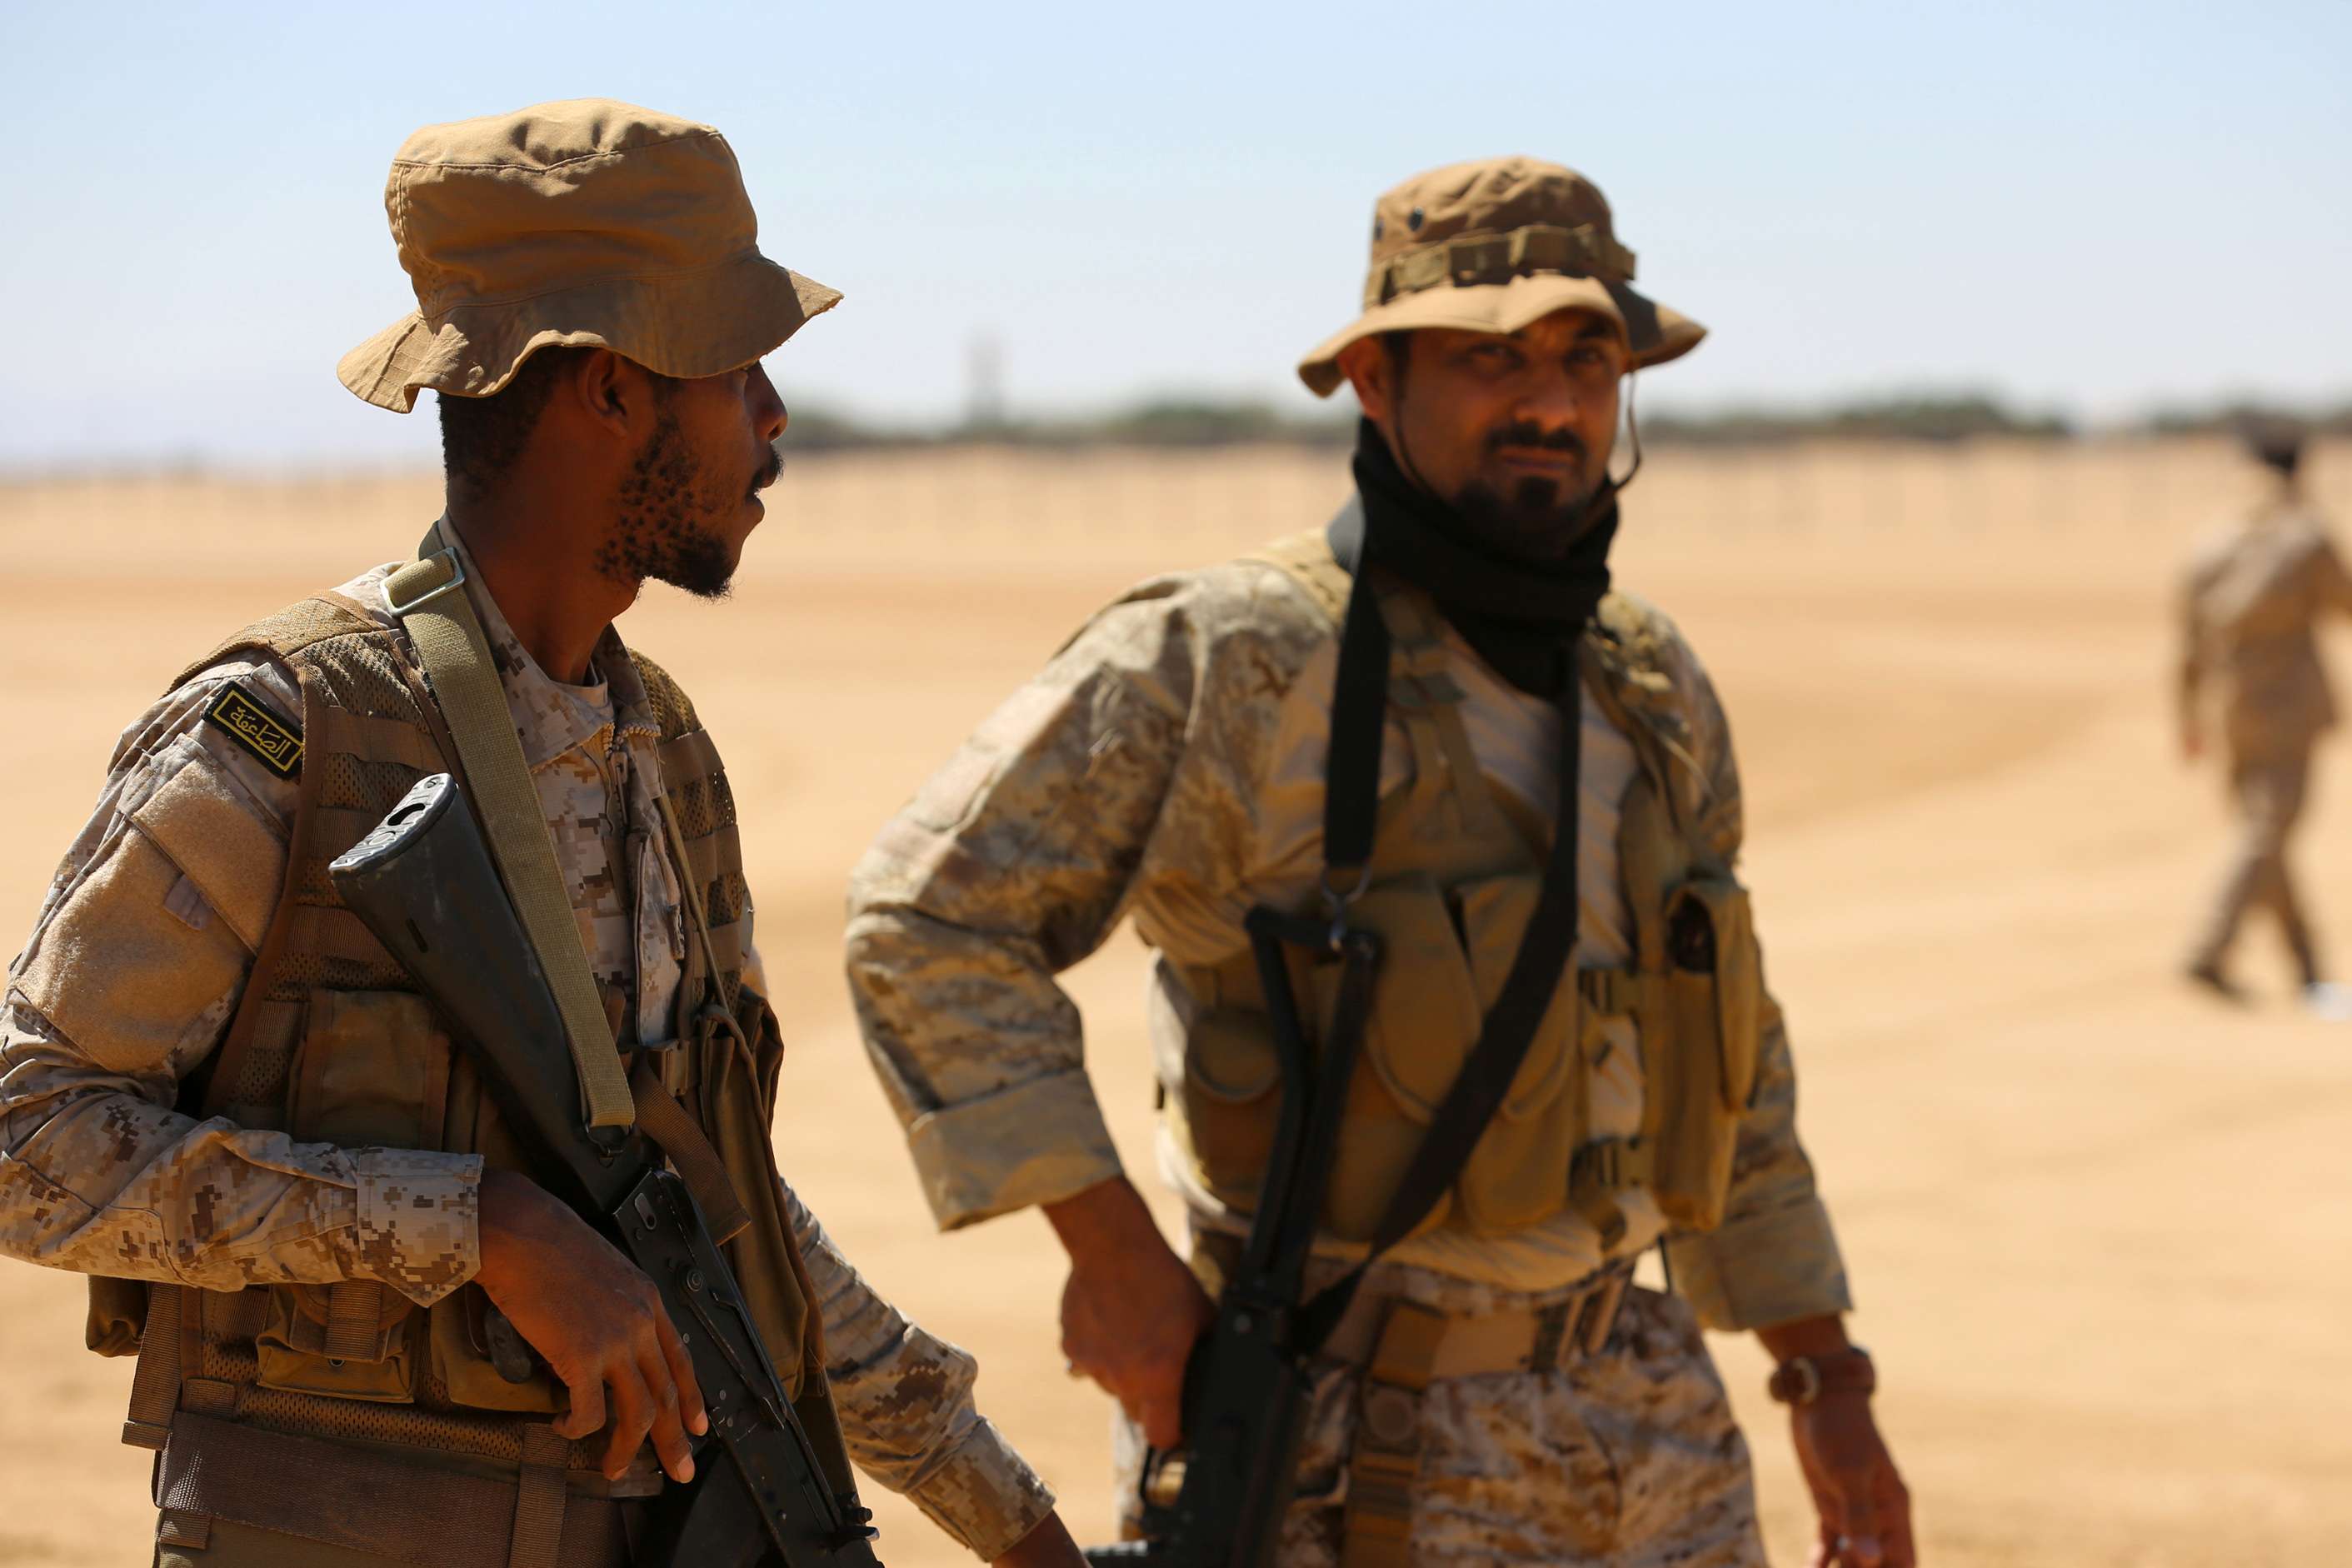 Saudi soldiers stand guard in Yemen's central province of Marib